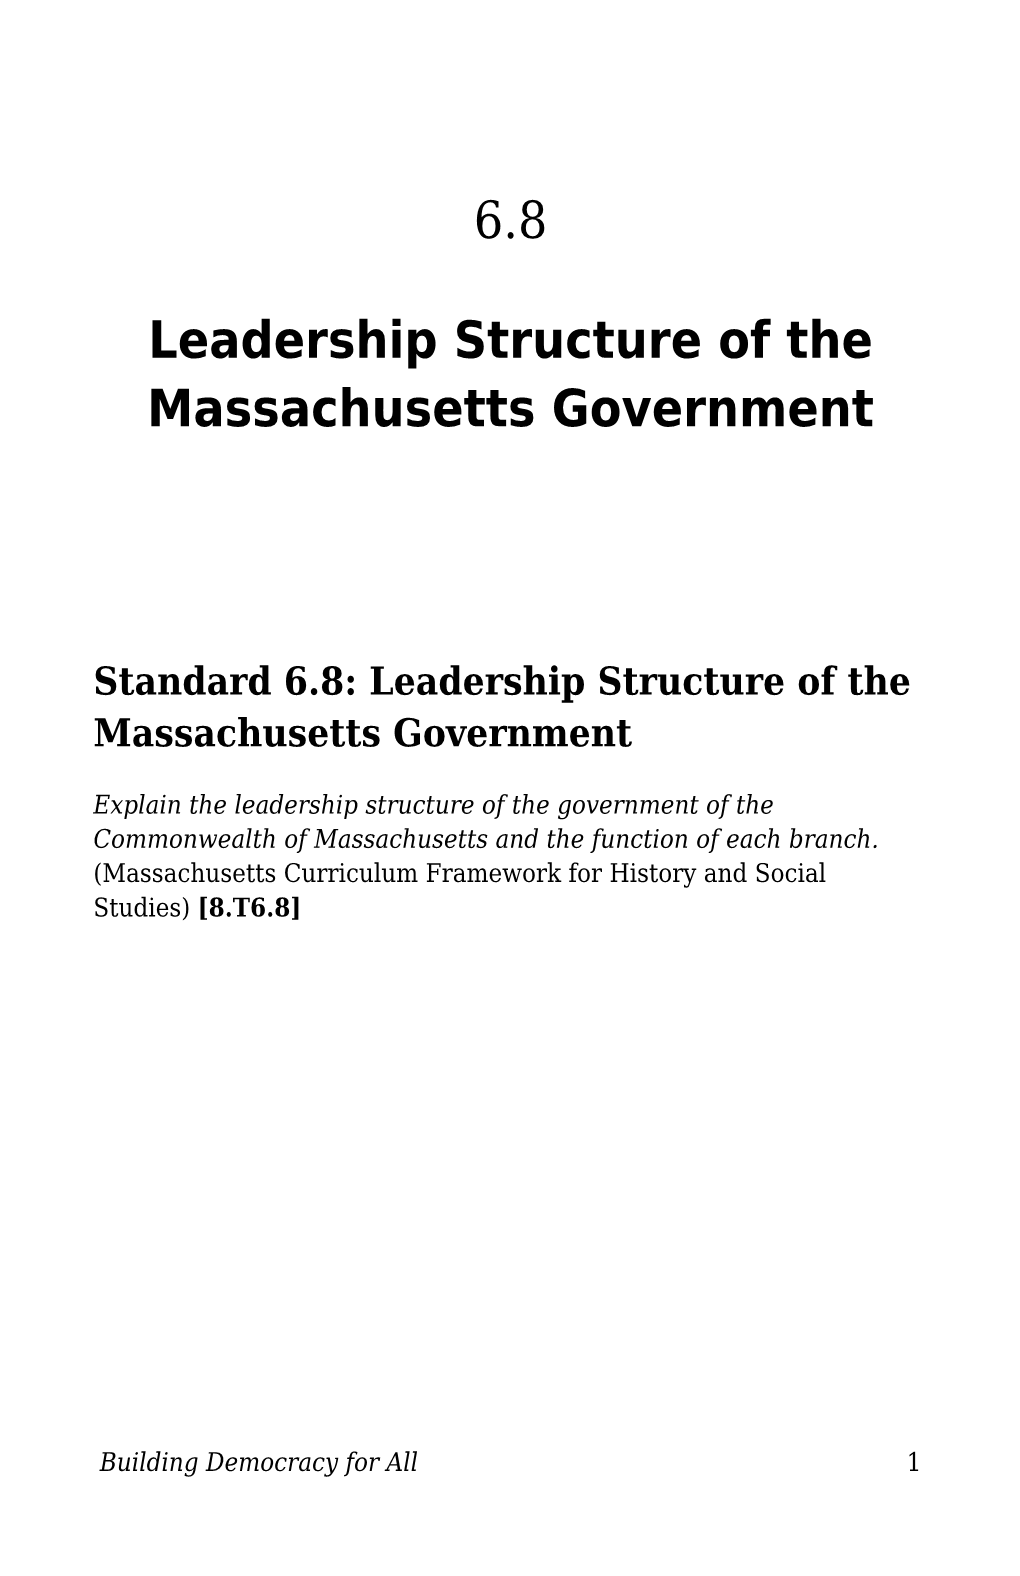 Leadership Structure of the Massachusetts Government